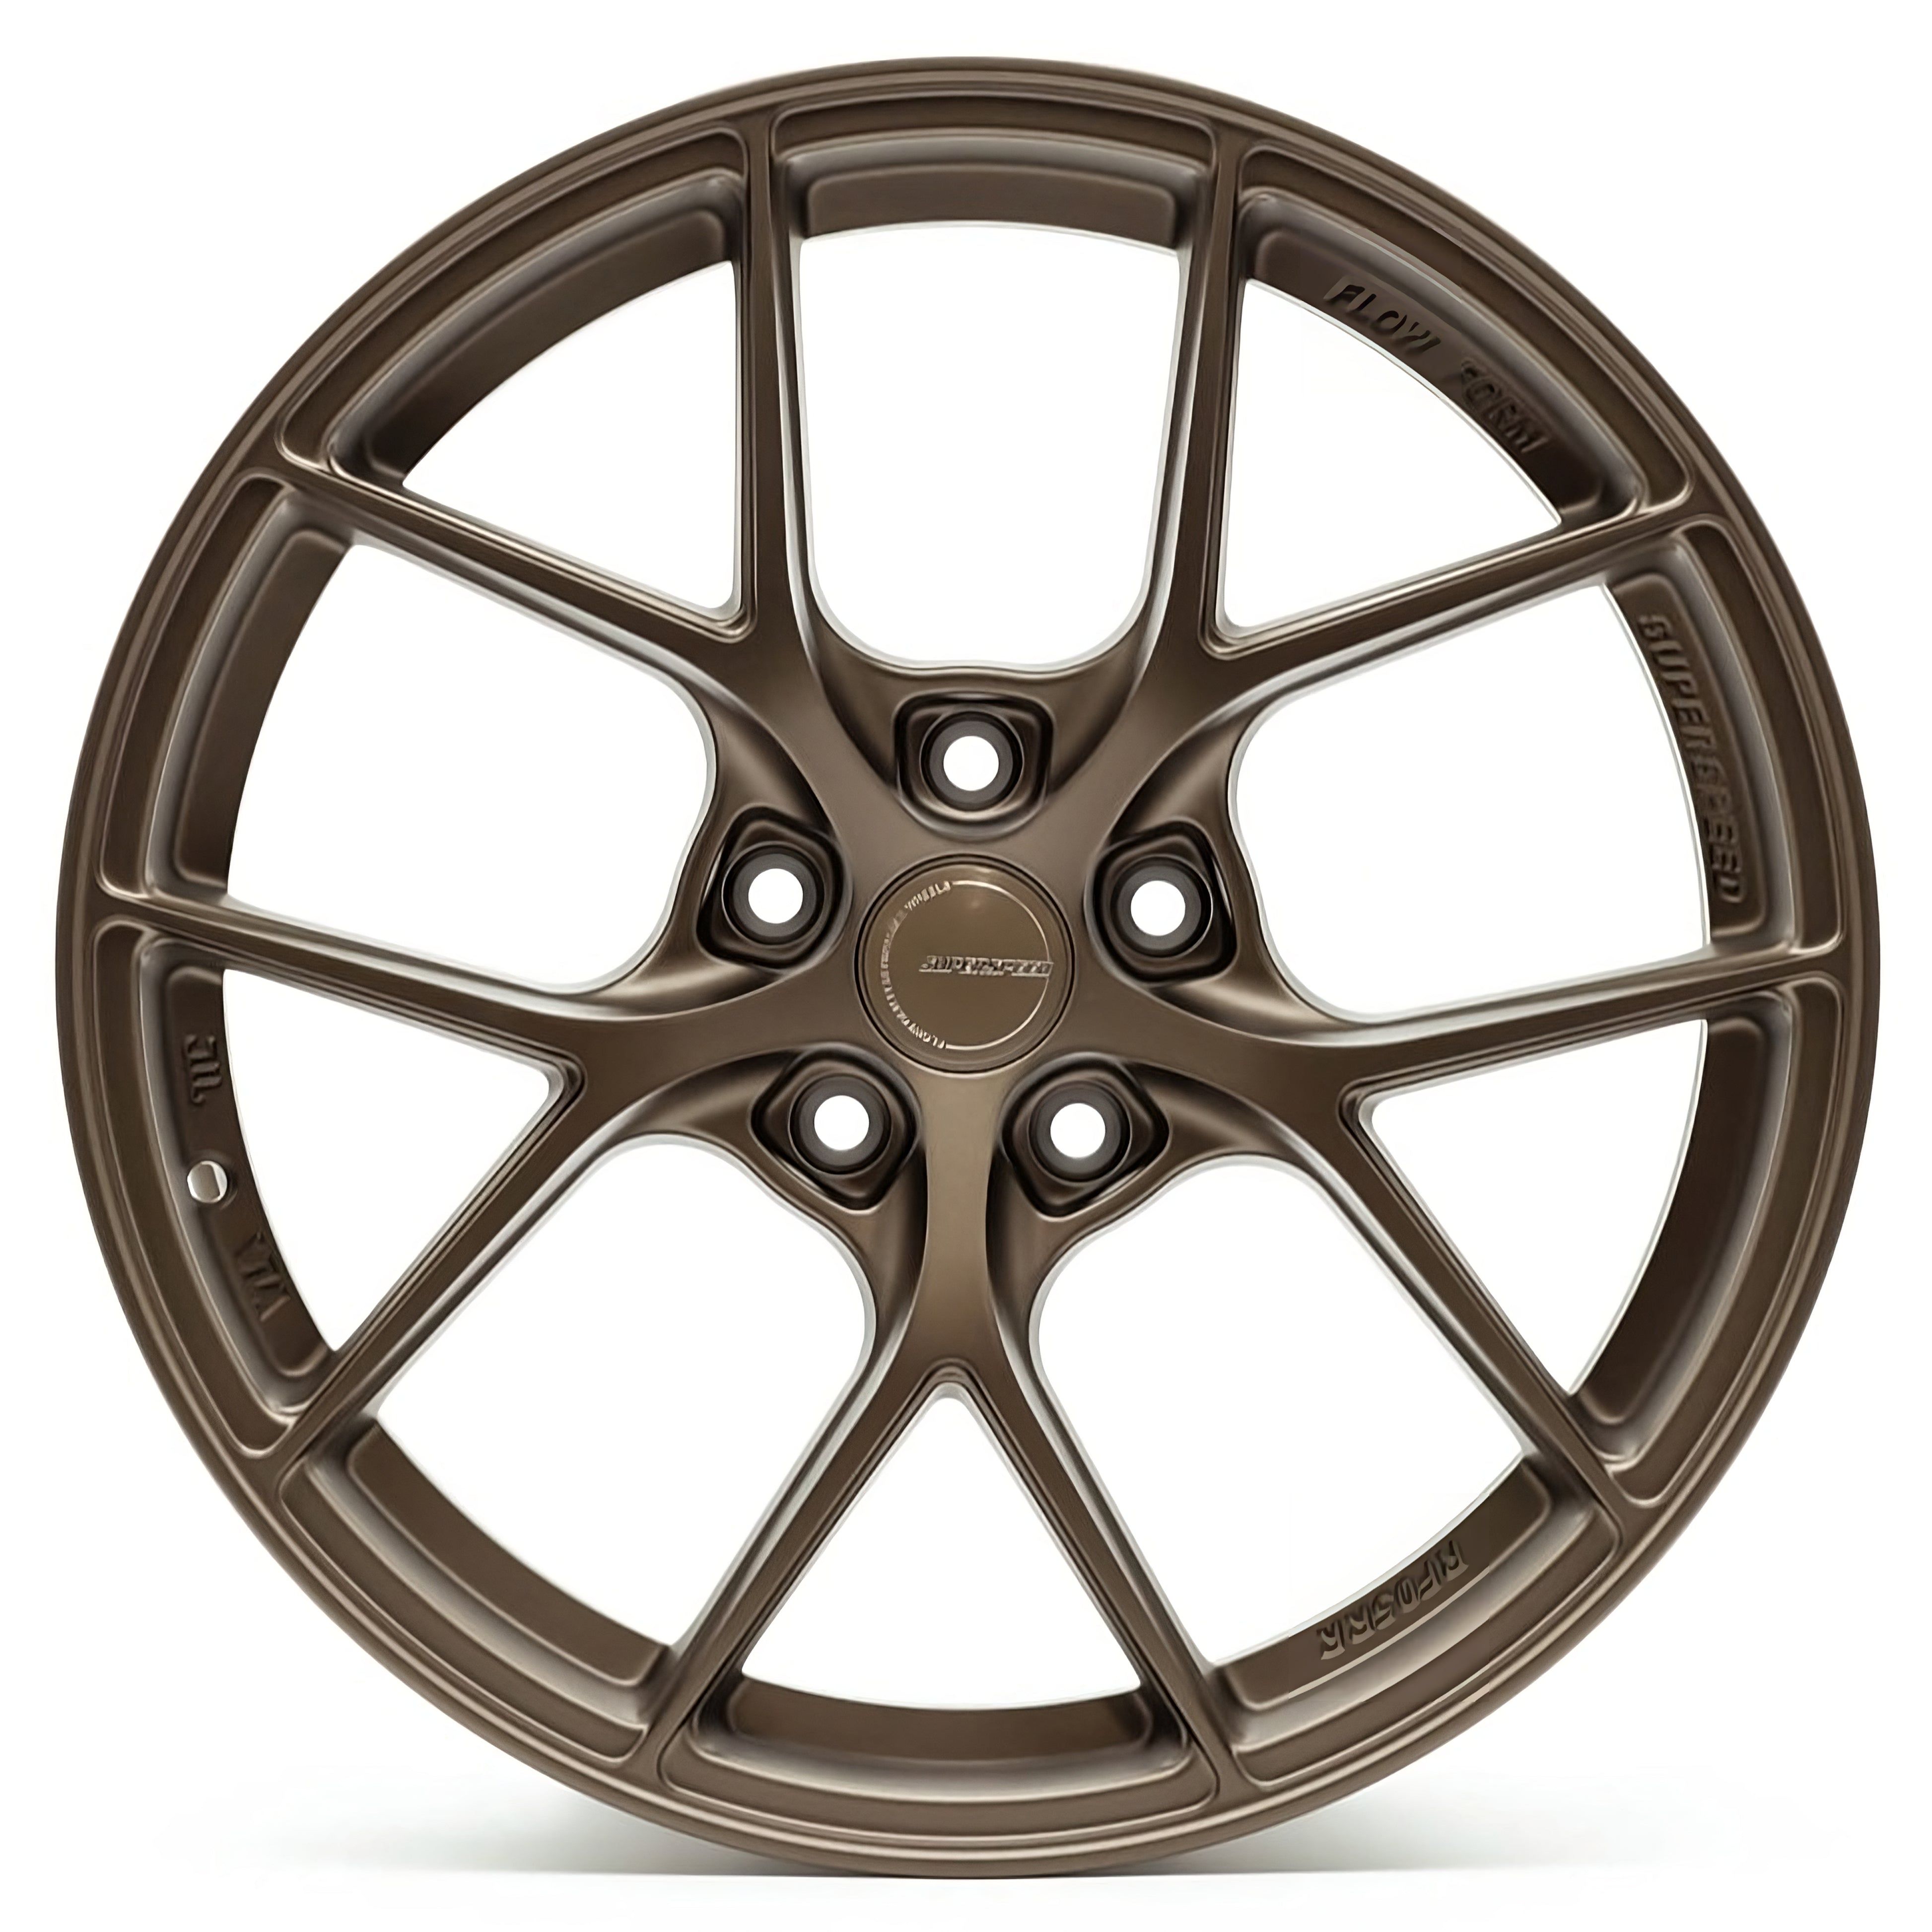 ⚡️You can find Superspeed RF05RR Satin Bronze - 20x9.5